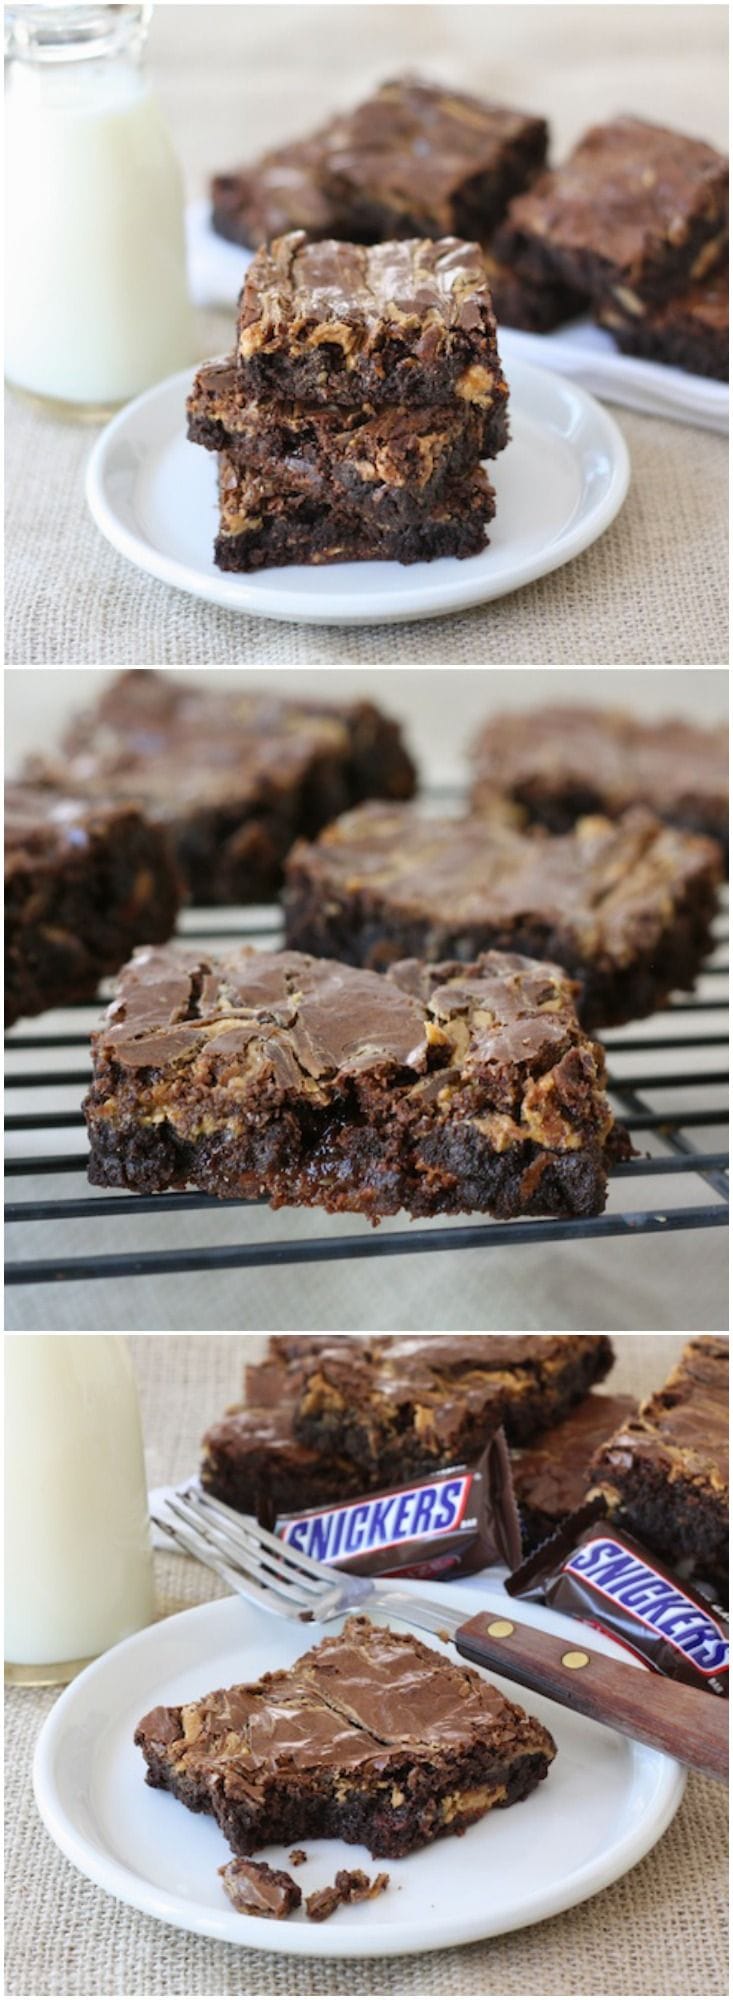 Peanut Butter Snickers Brownie Recipe on twopeasandtheirpod.com These brownies are amazing! A must make!